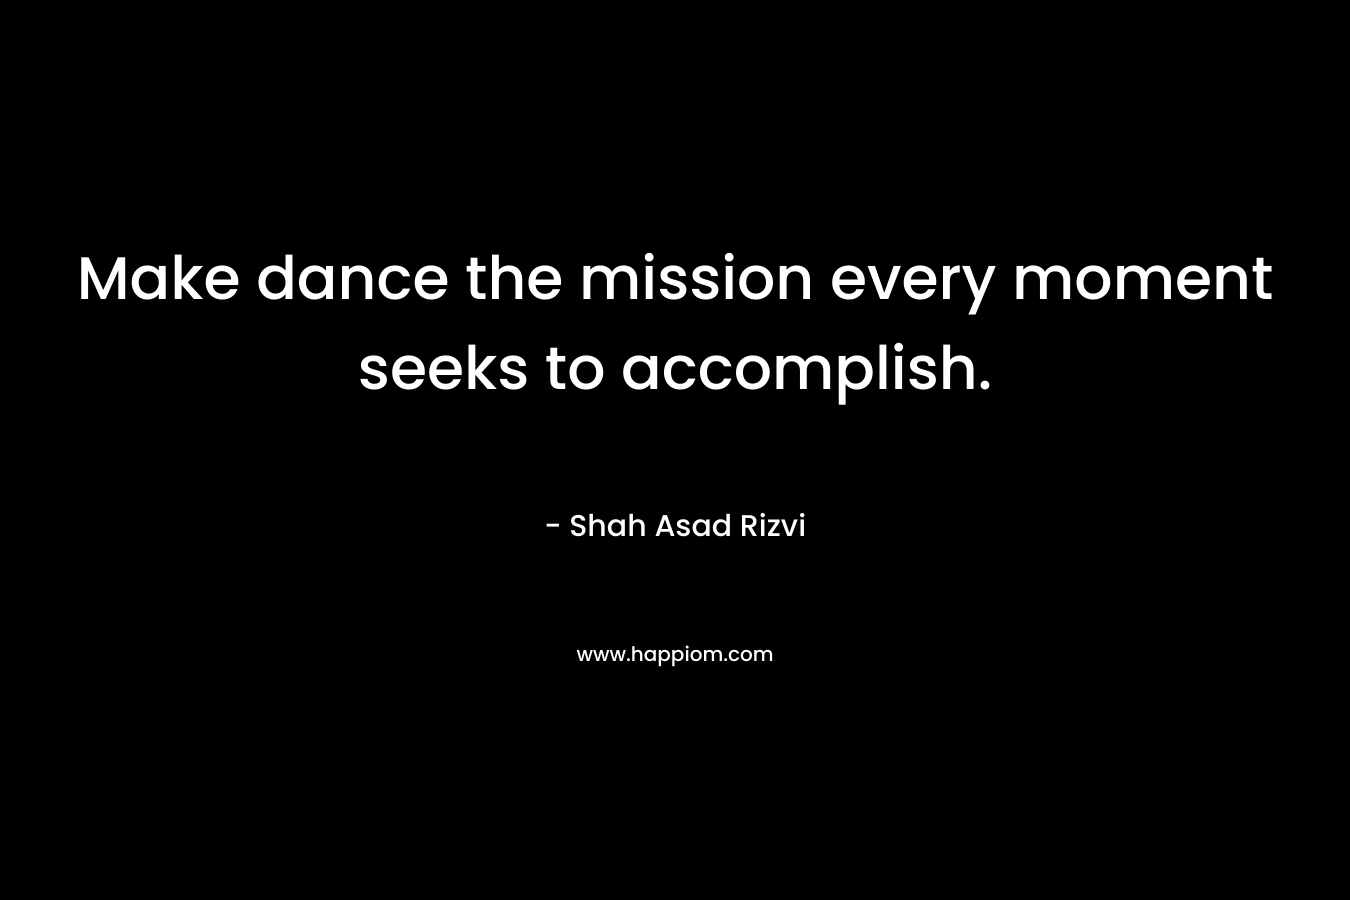 Make dance the mission every moment seeks to accomplish.